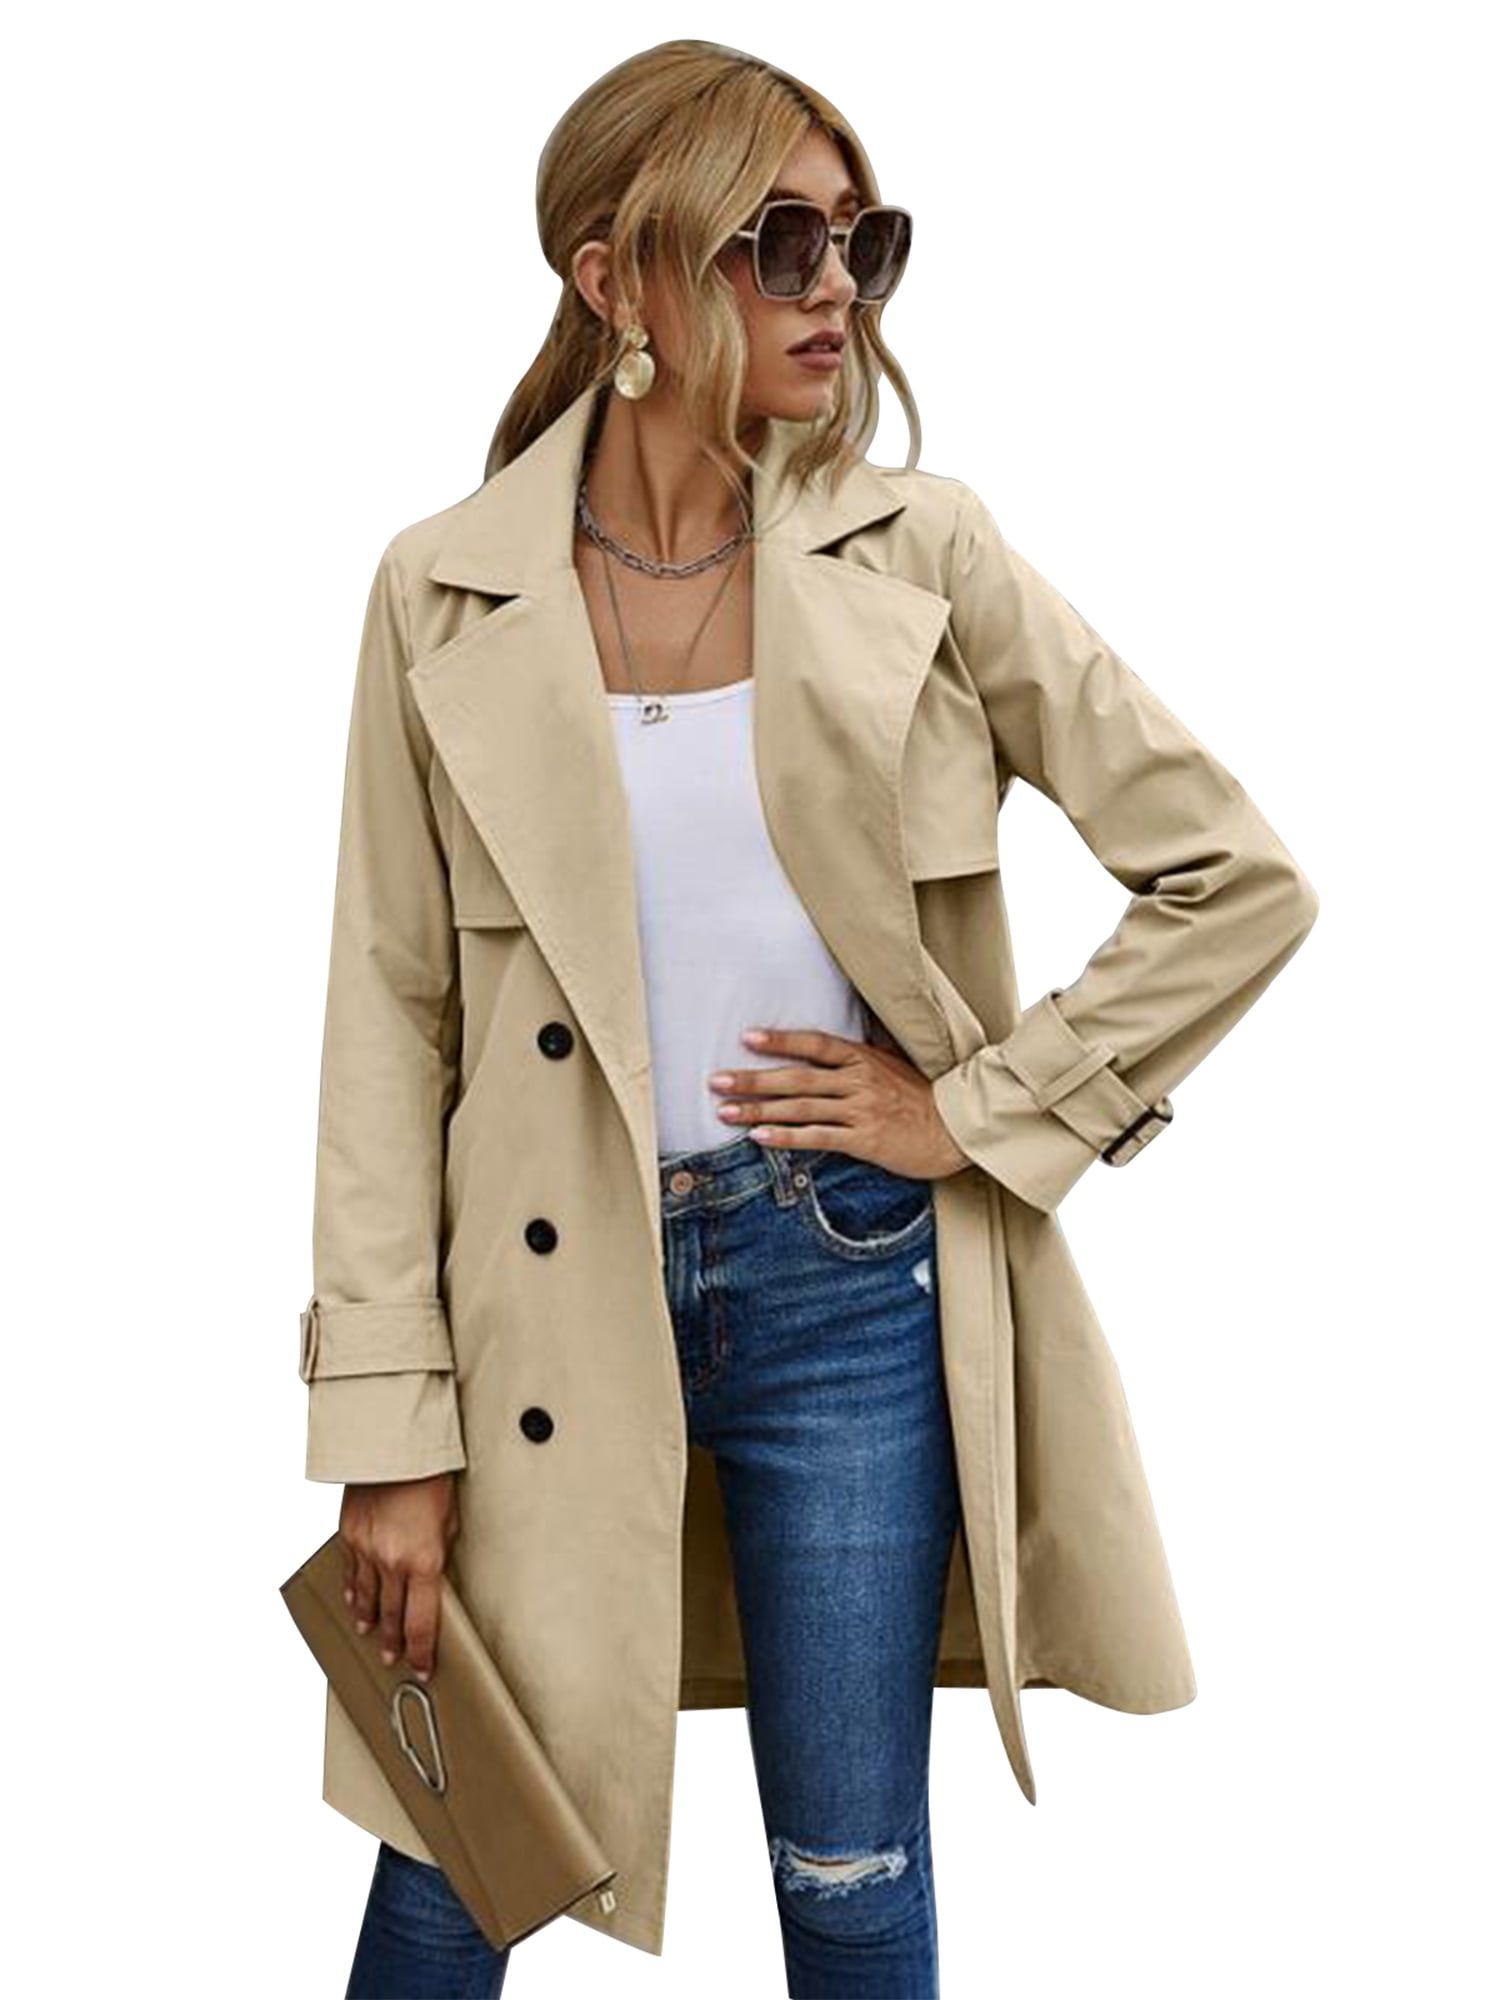 Mioliknya Women Solid Color Jacket Long Sleeve Lapel Double Breasted ...